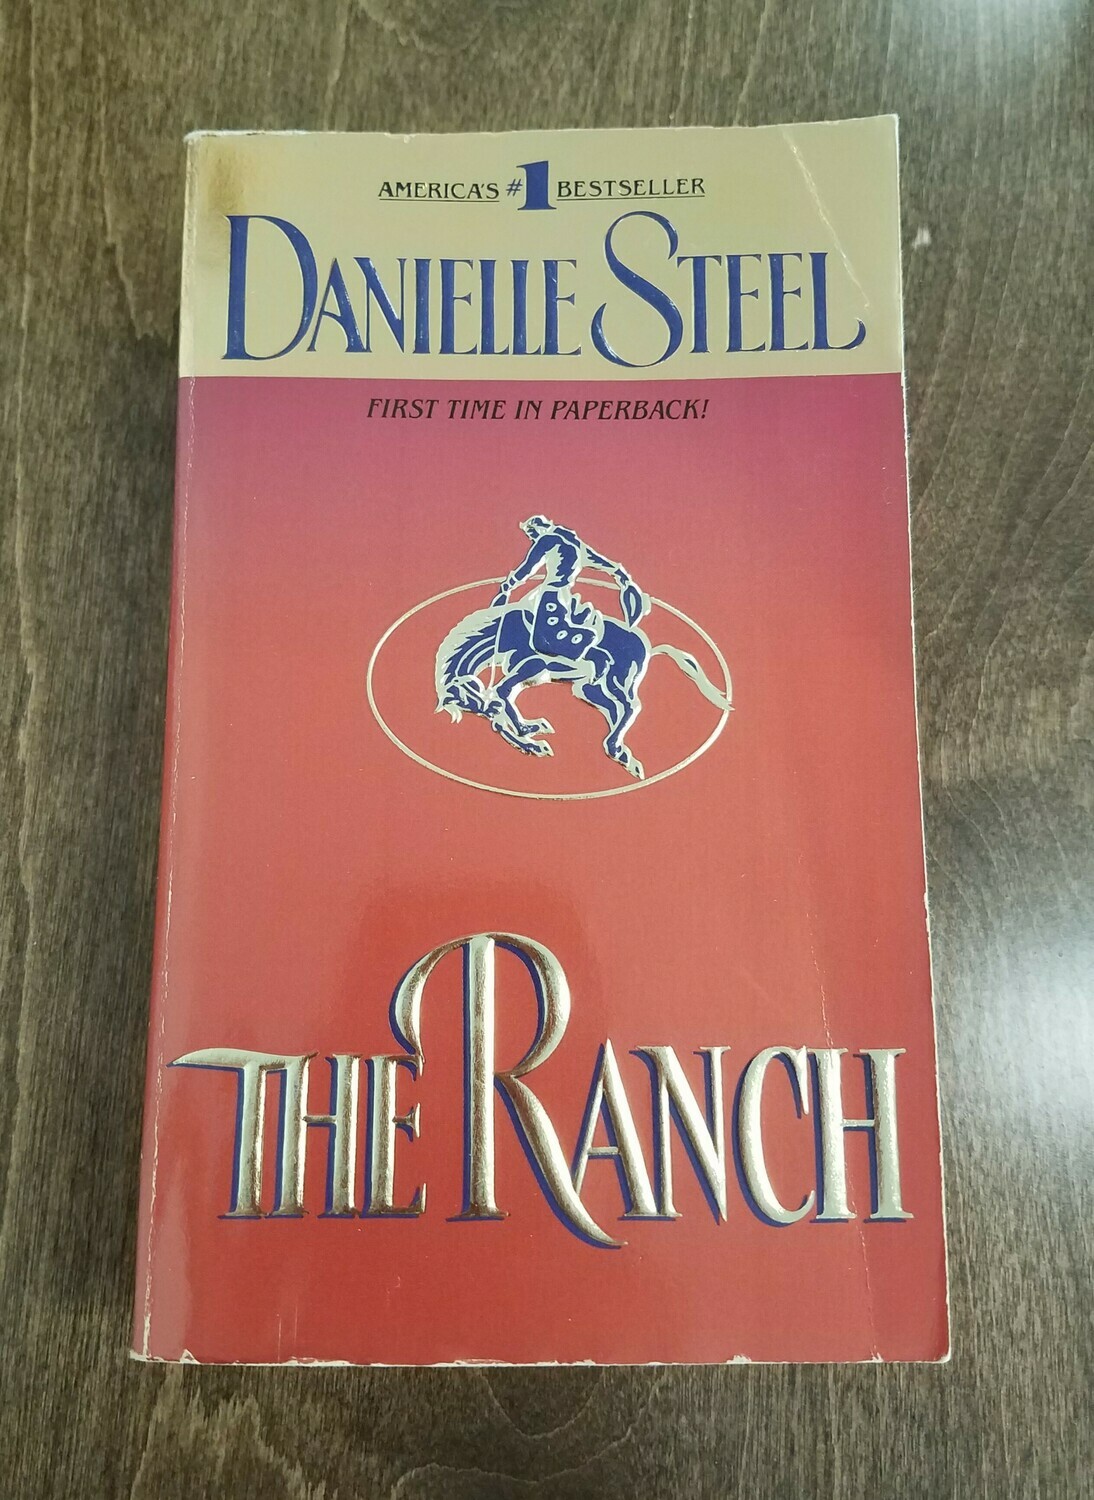 The Ranch by Danielle Steel